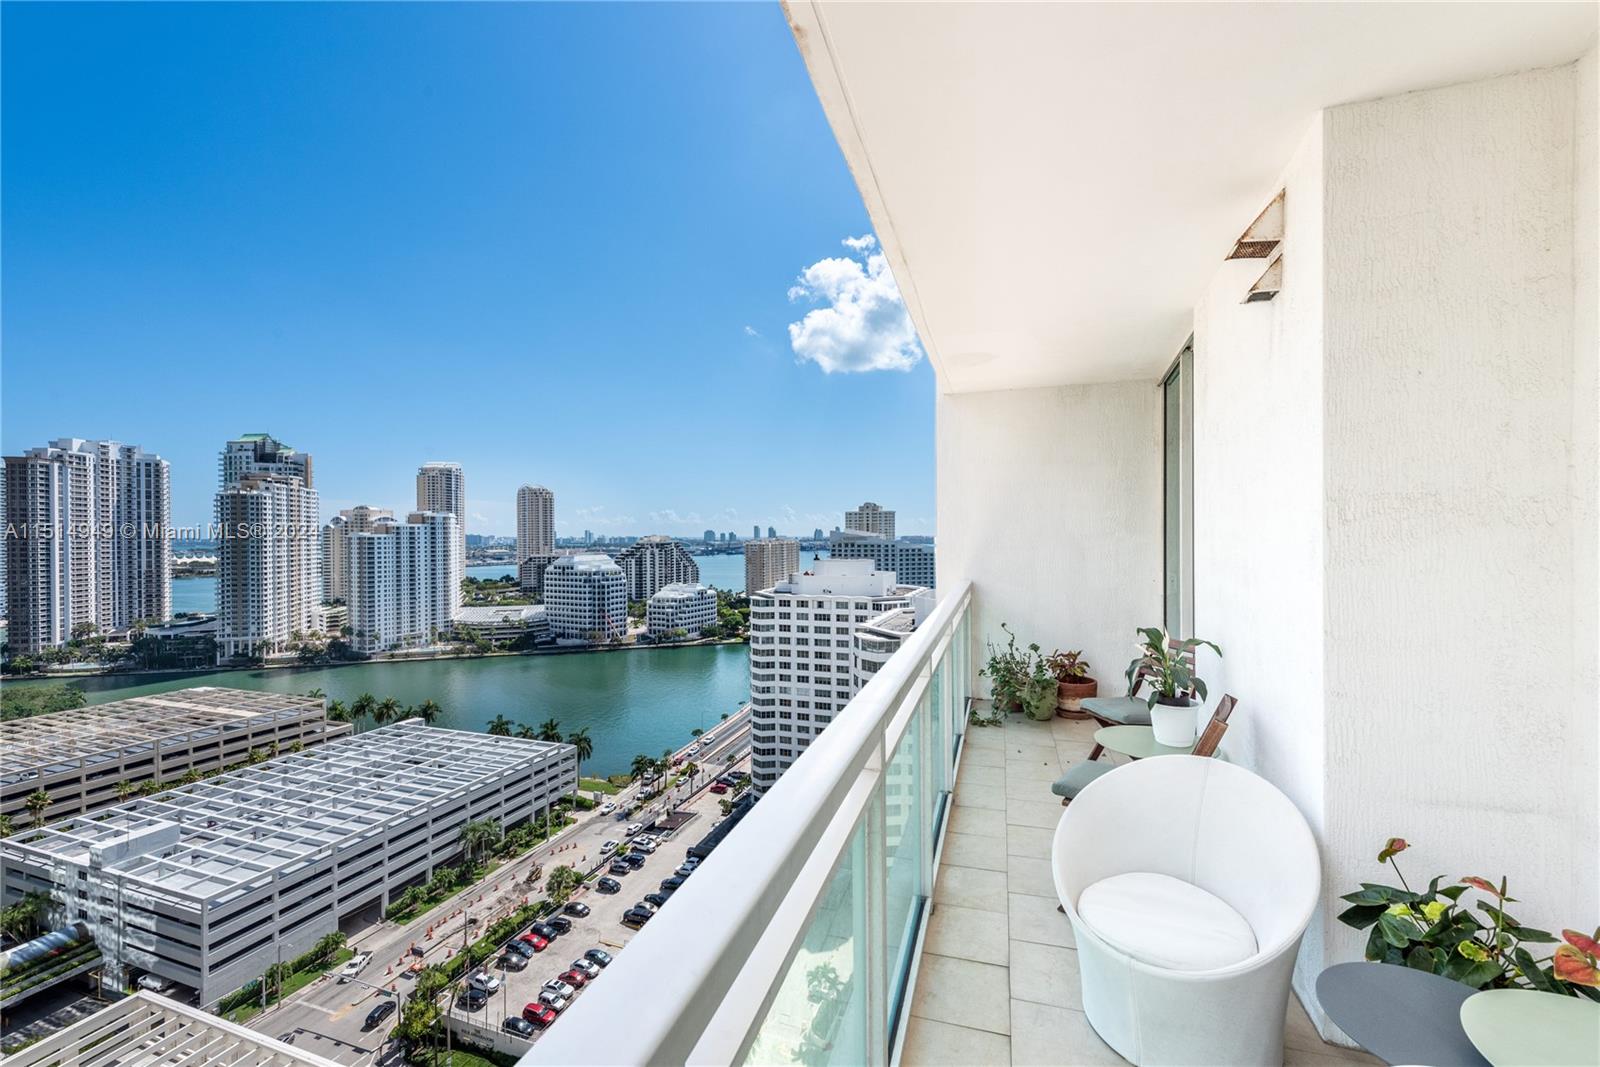 BEAUTIFUL 2 BED 2 BATH IN THE HEART OF BRICKELL. STAINLESS STEEL APPLIANCES, BIGLIVING ROOM AREA , BEDROOMS WITH WALK-IN CLOSETS & FULL BATHROOMS WITHDOUBLE SINKS. GREAT VIEW OF BRICKELL KEY AND BAY.EXCELLENT CONDITION, LIKENEW! LOTS OF LIGHT. BUILDING FU LL OF AMENITIES FEATURING 2 RESTAURANTS AND AHAIR SALON AT THE PLAZA LEVEL. ONE BLOCK AWAY FROM MARY BRICKELL VILLAGE.